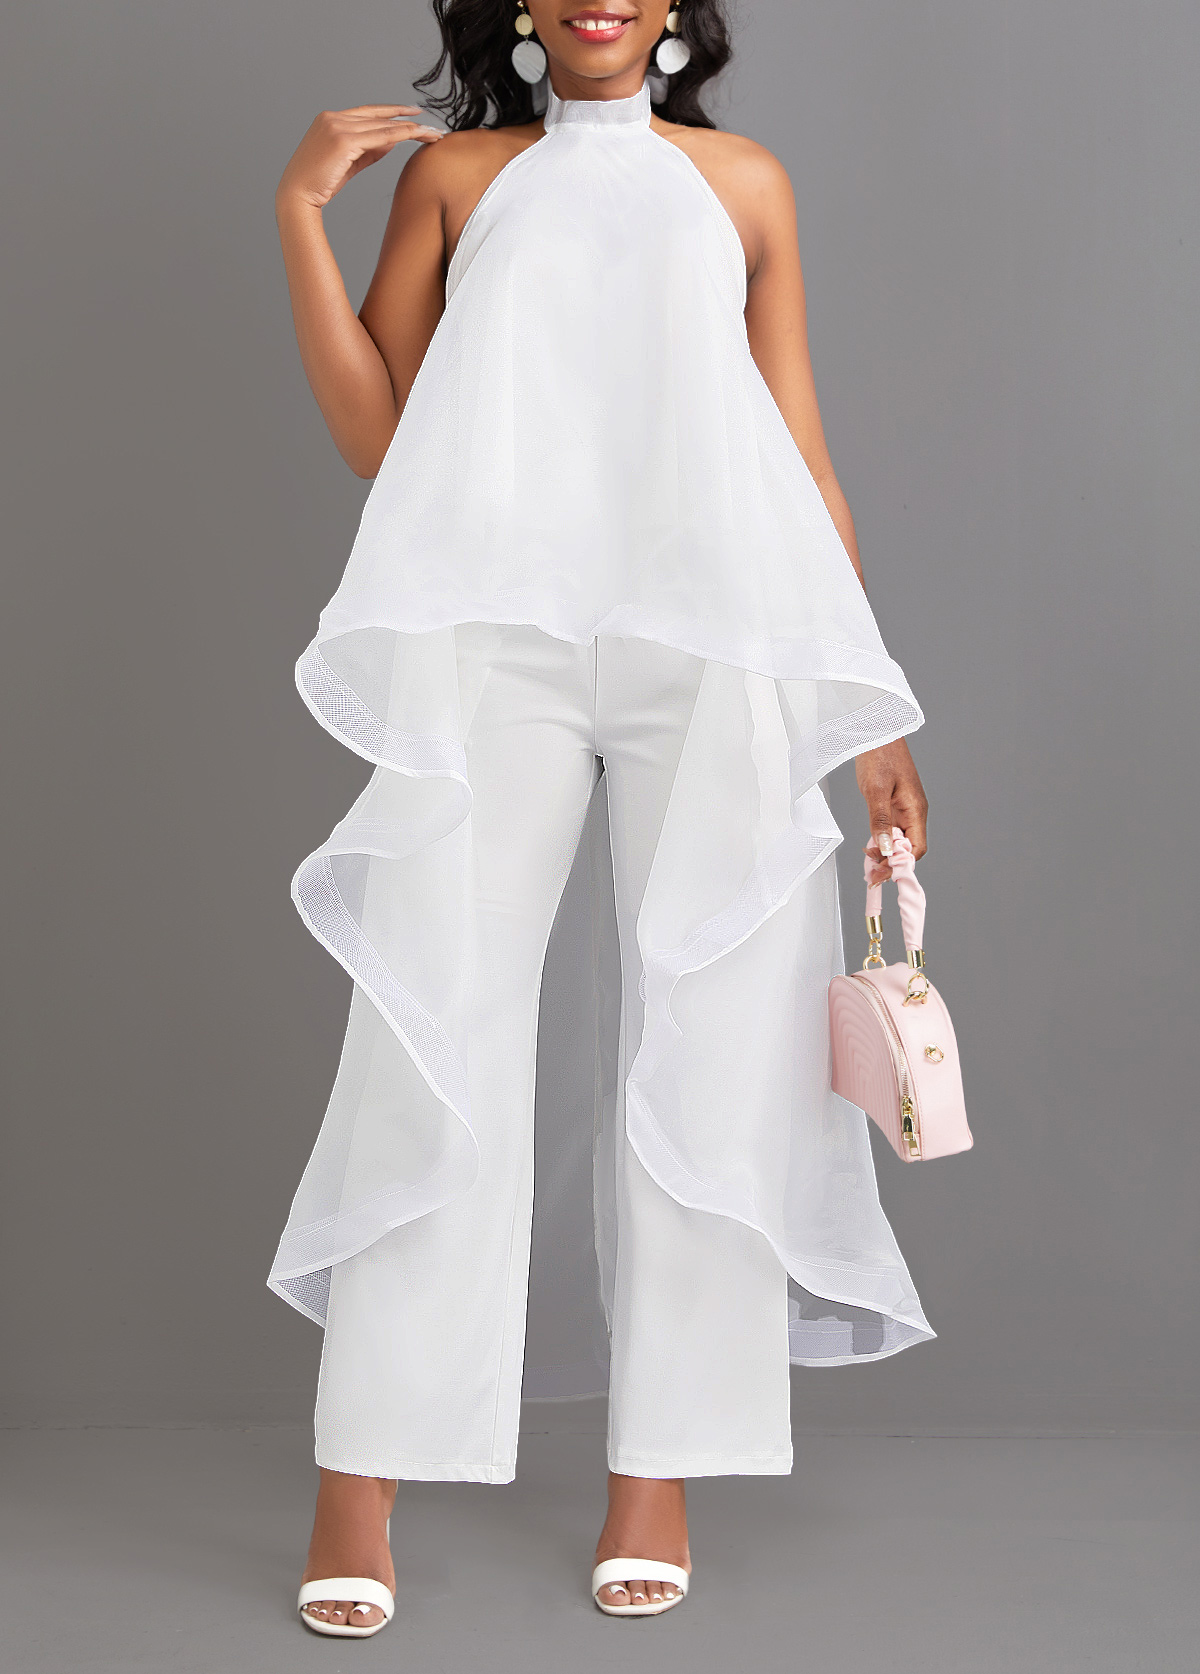 White Tie Ankle Length Sleeveless Top and Pants